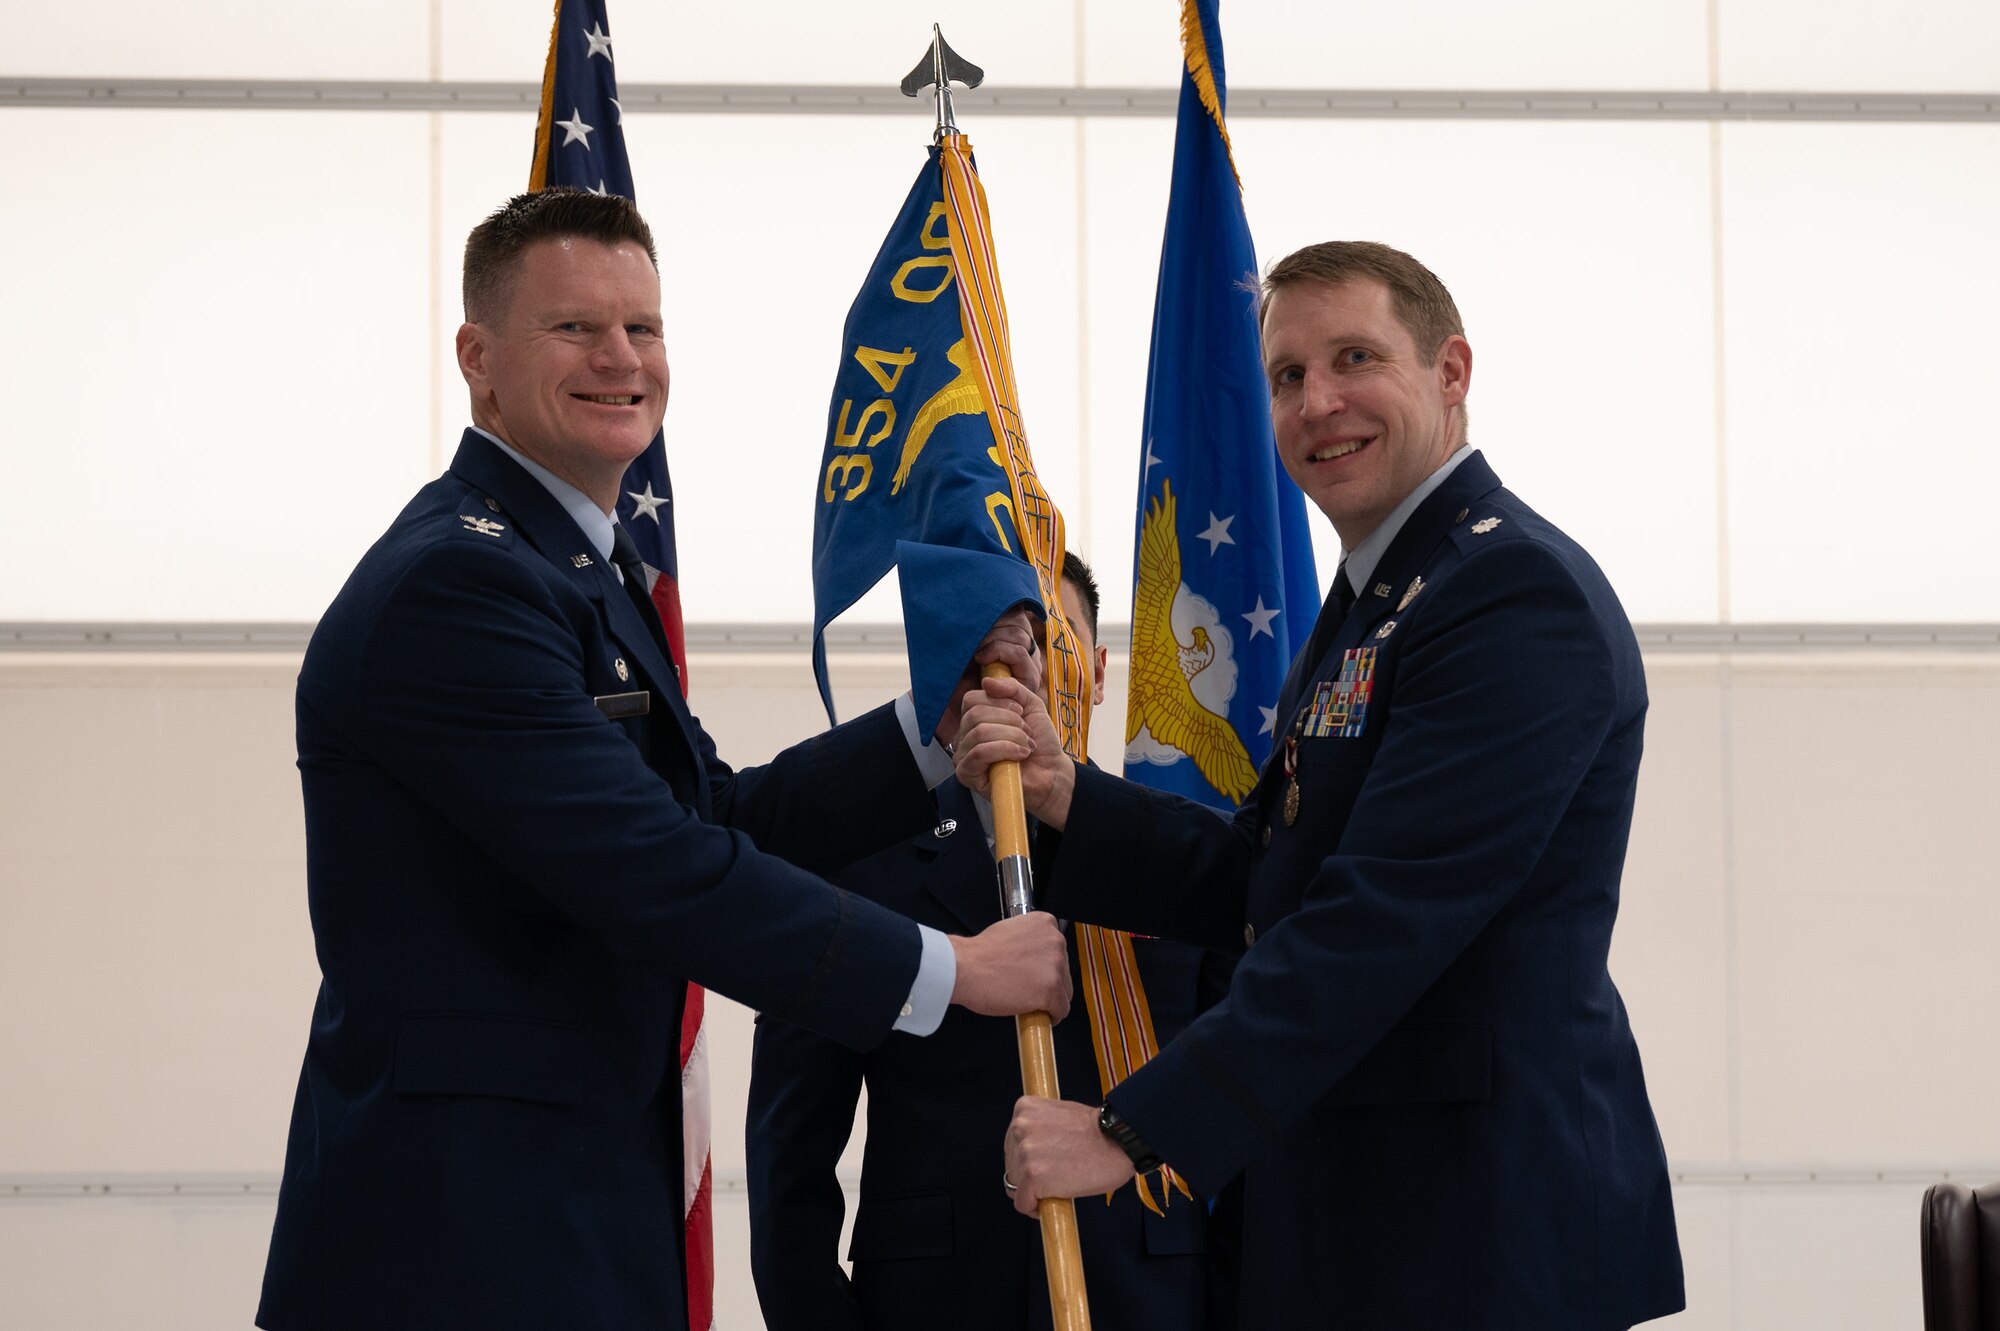 Photo of Lt. Col. Abraham Lehmann returning the guidon during the change of command of 354th OSS at Eielson Air Force Base, Alaska.